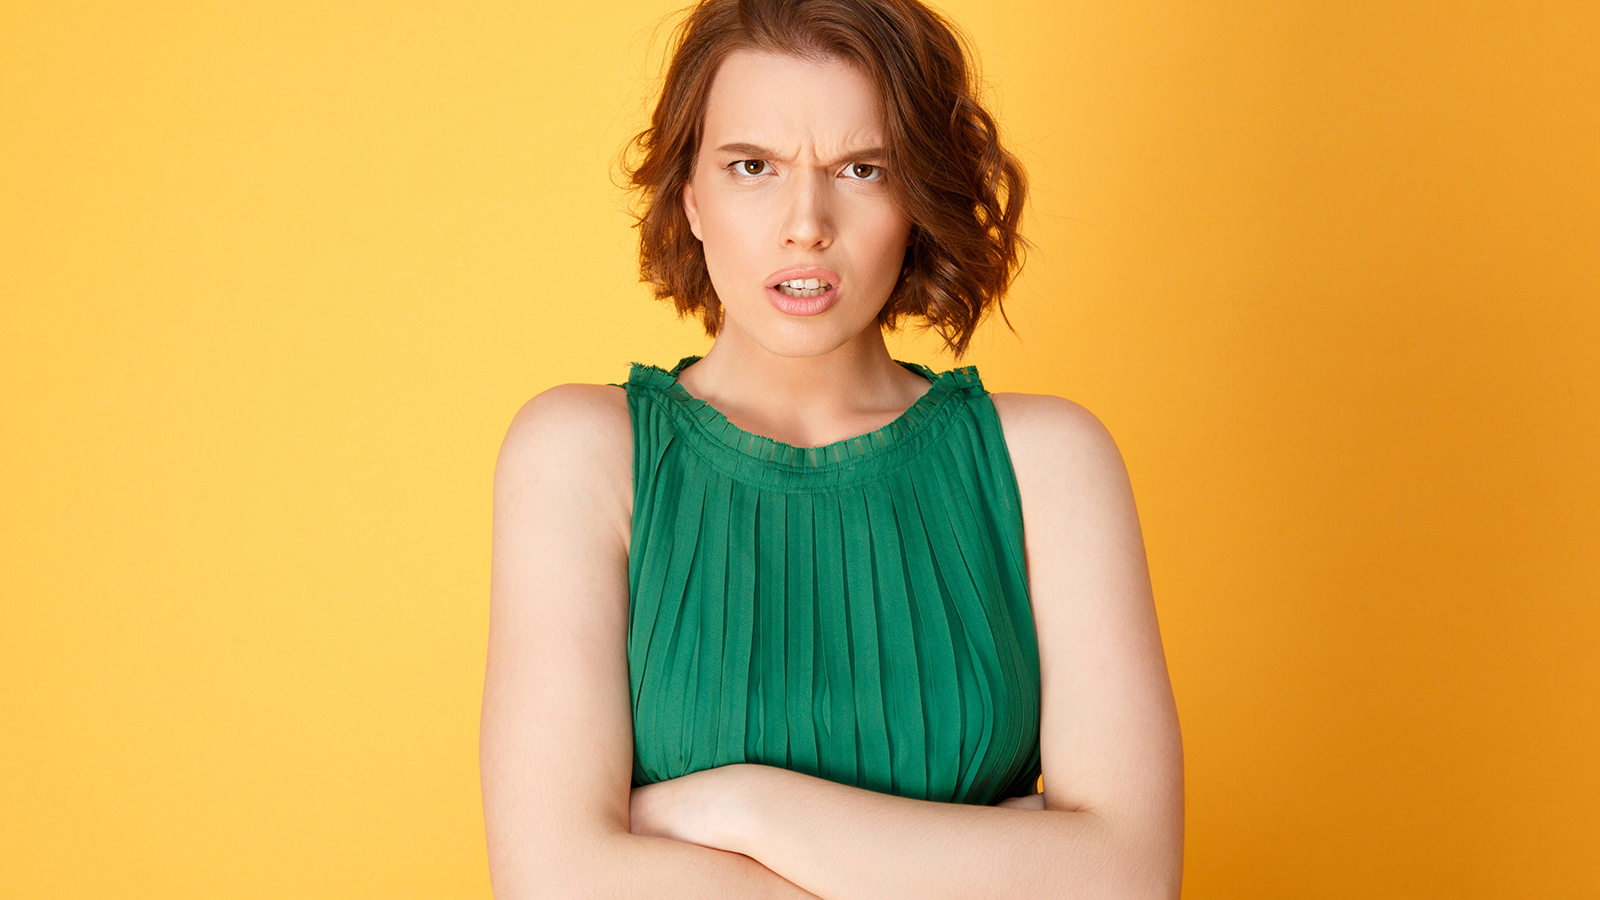 portrait of angry woman with arms crossed looking at camera isolated on orange